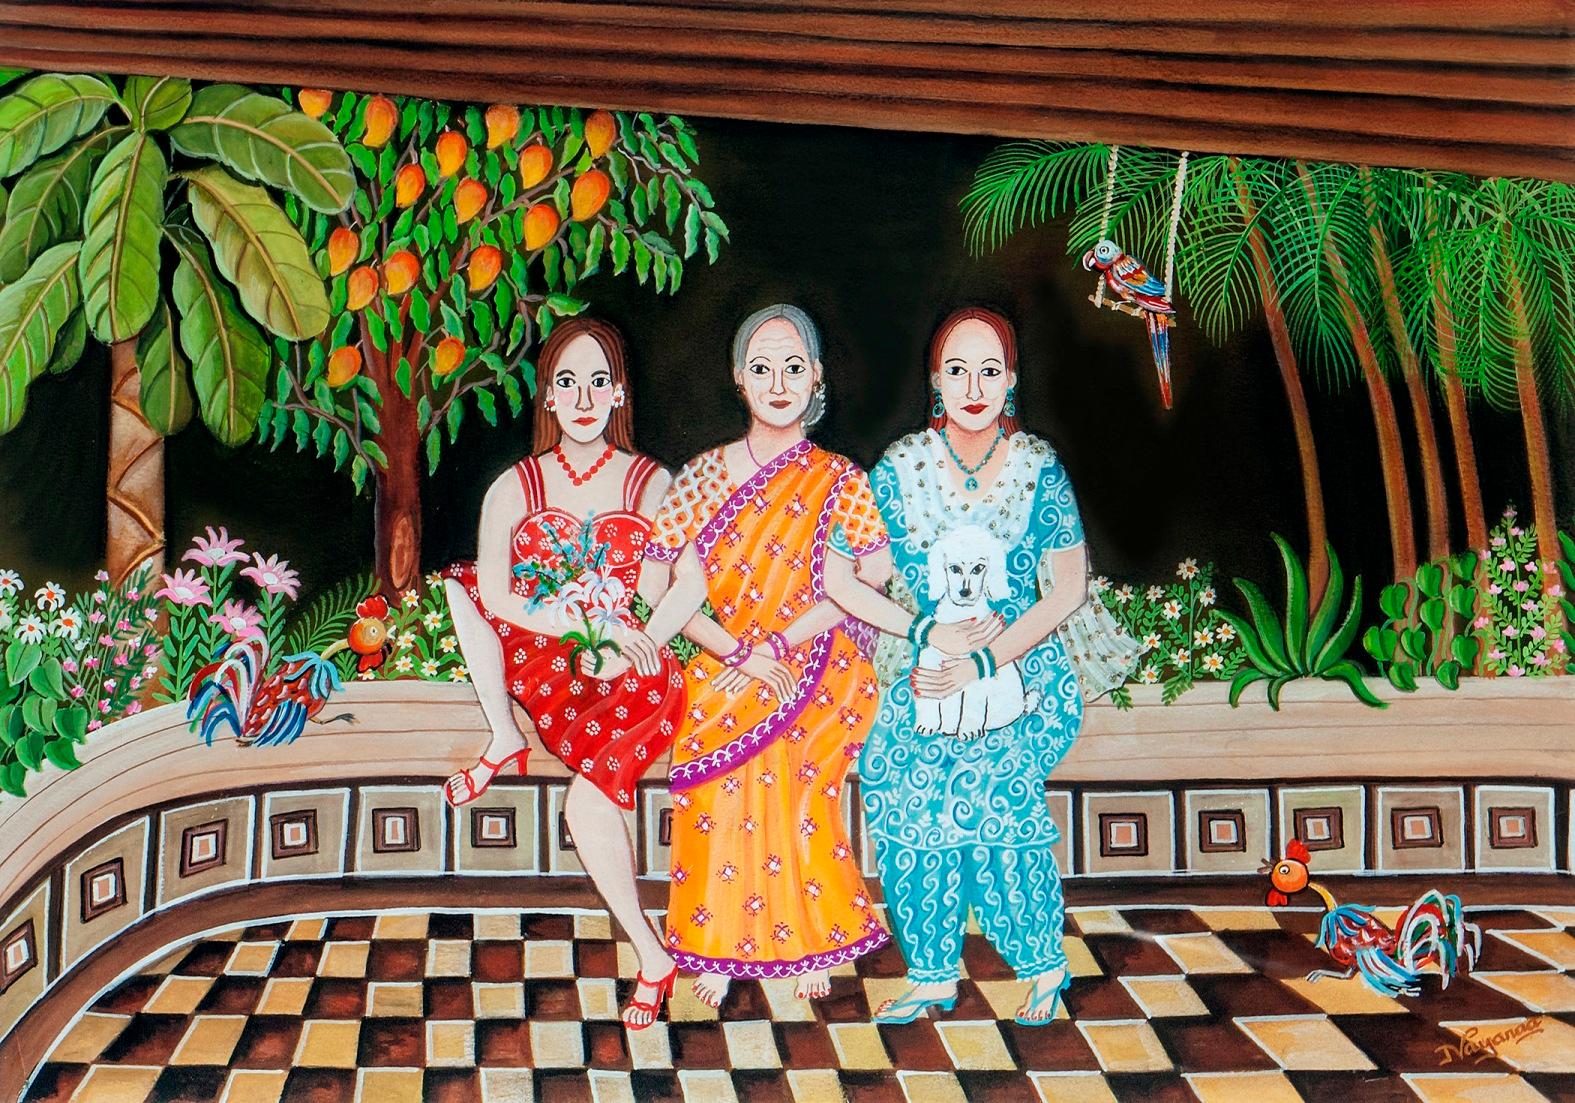 Nayanaa Kanodia Figurative Painting - The Verandah, Mixed Media on Paper, Red, Green by Contemporary Artist "In Stock"